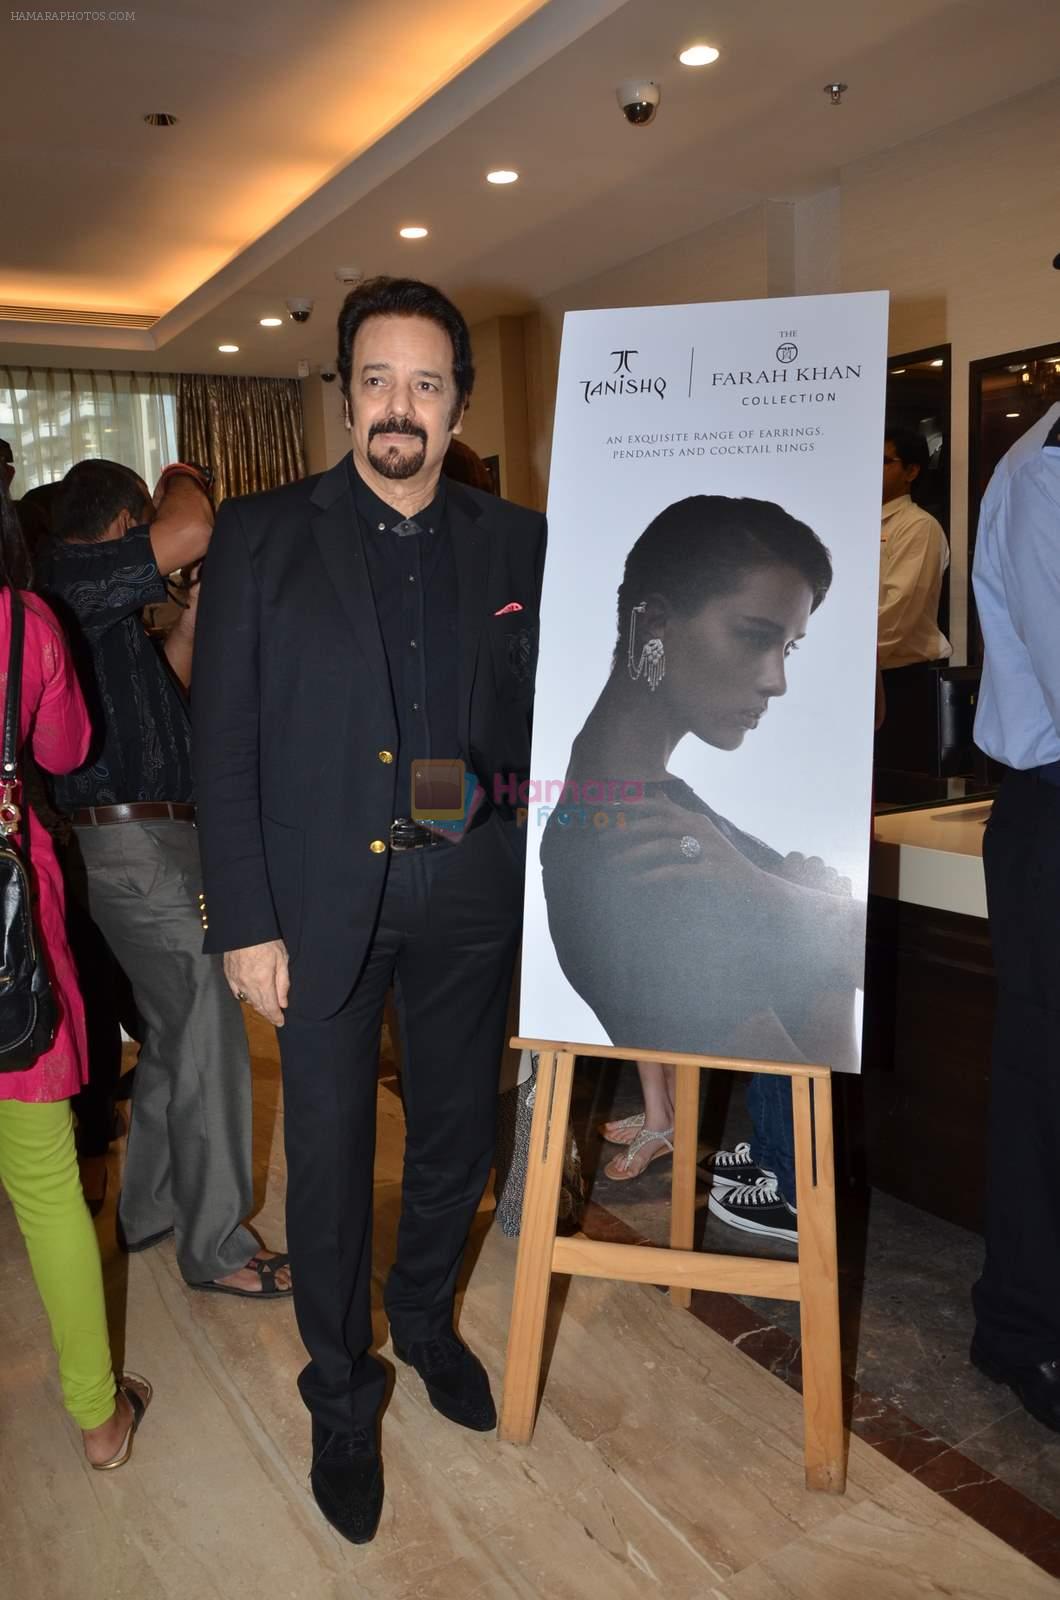 Akbar Khan at Farah Khan Ali's new collection launch with Tanishq in Andheri, Mumbai on 13th Aug 2015